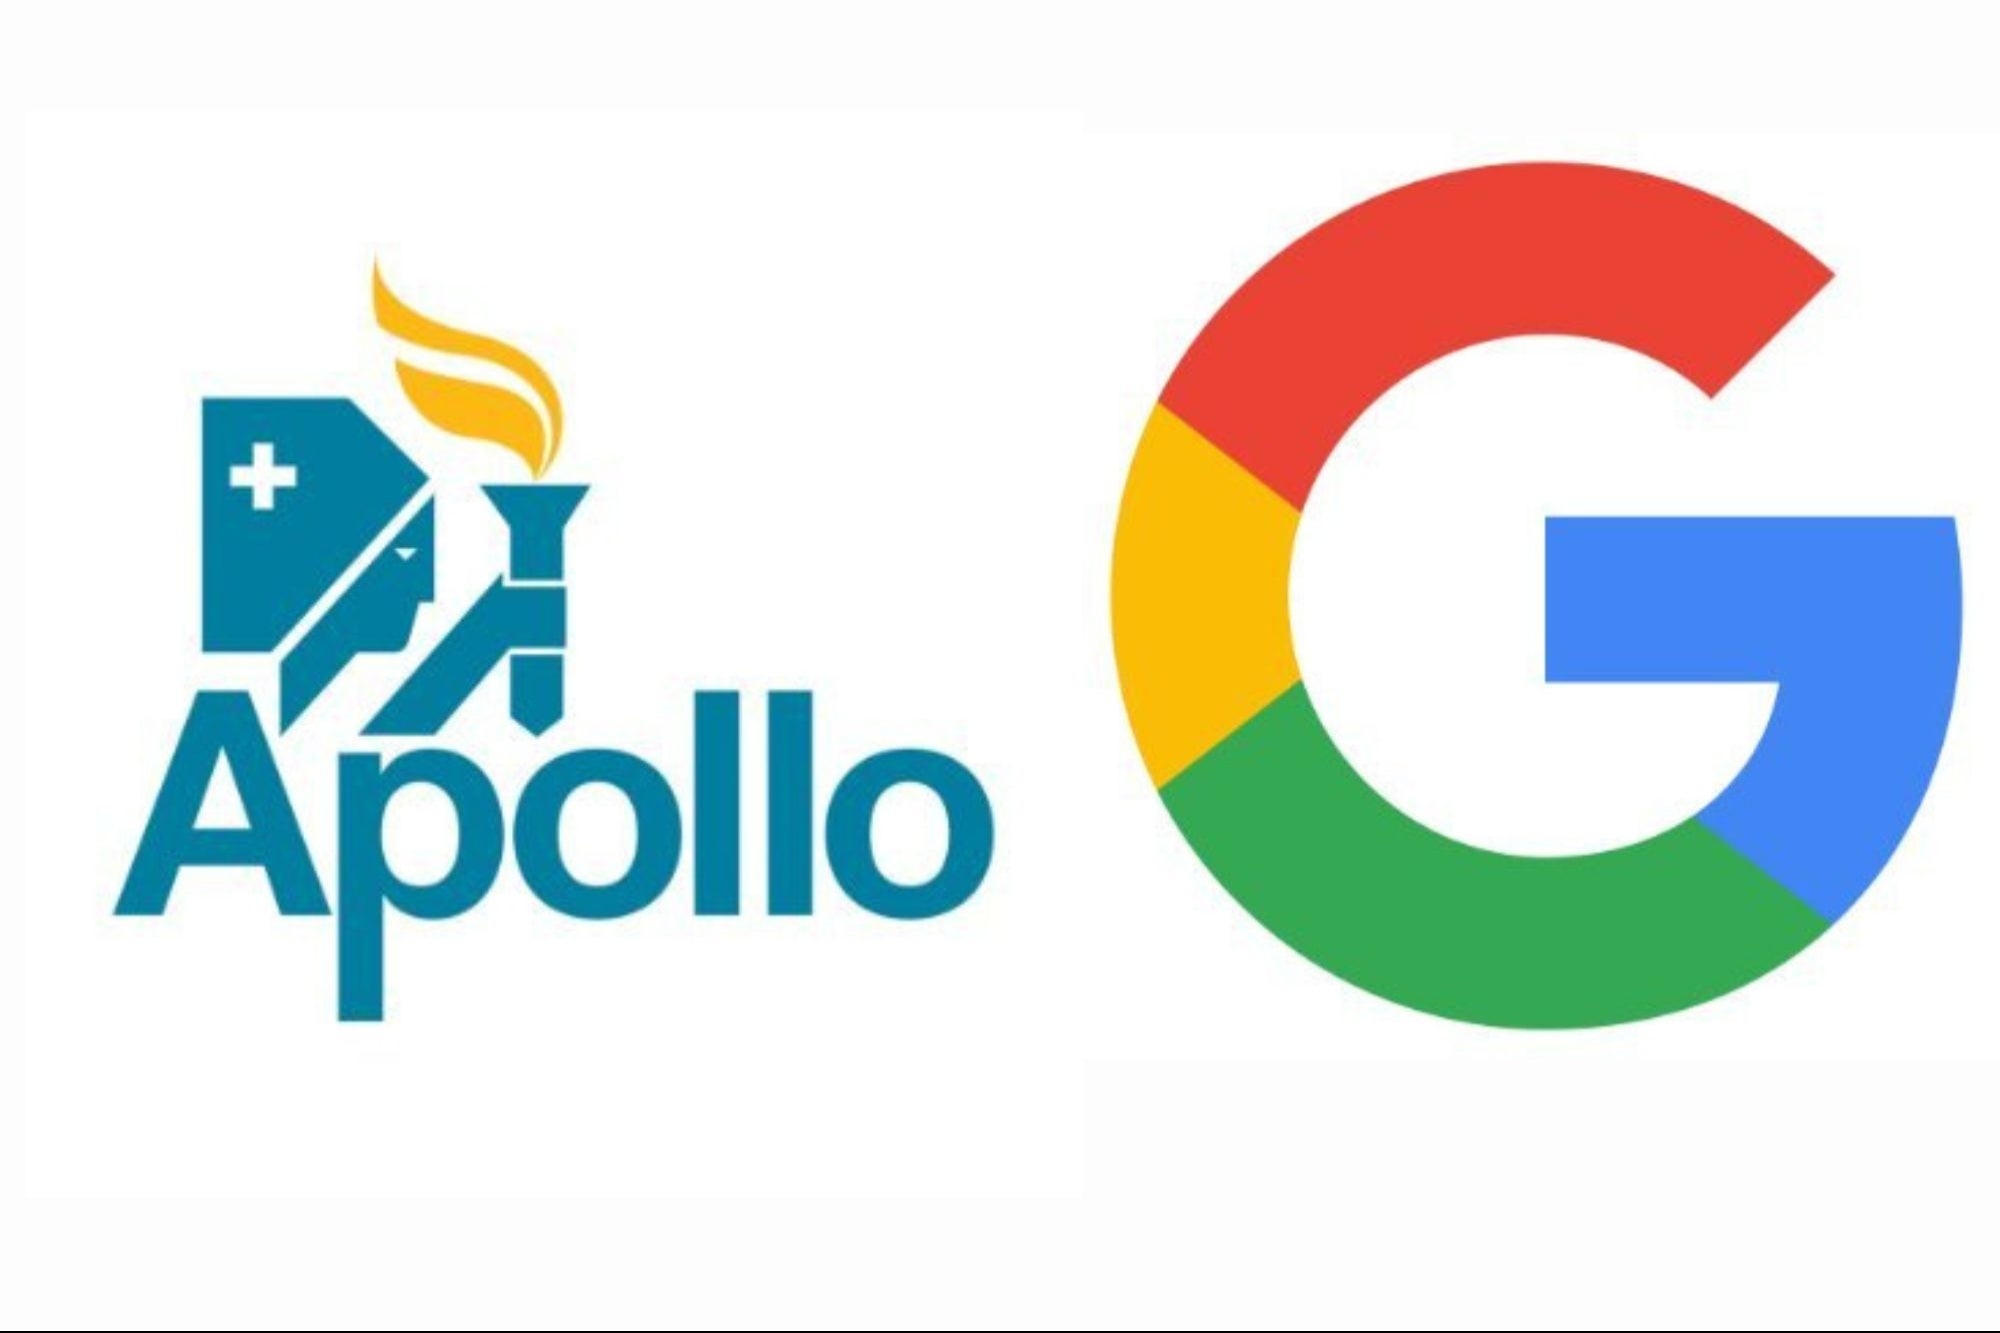 Google Collaborates With Apollo to Bring AI-Powered Early Disease Screening to India